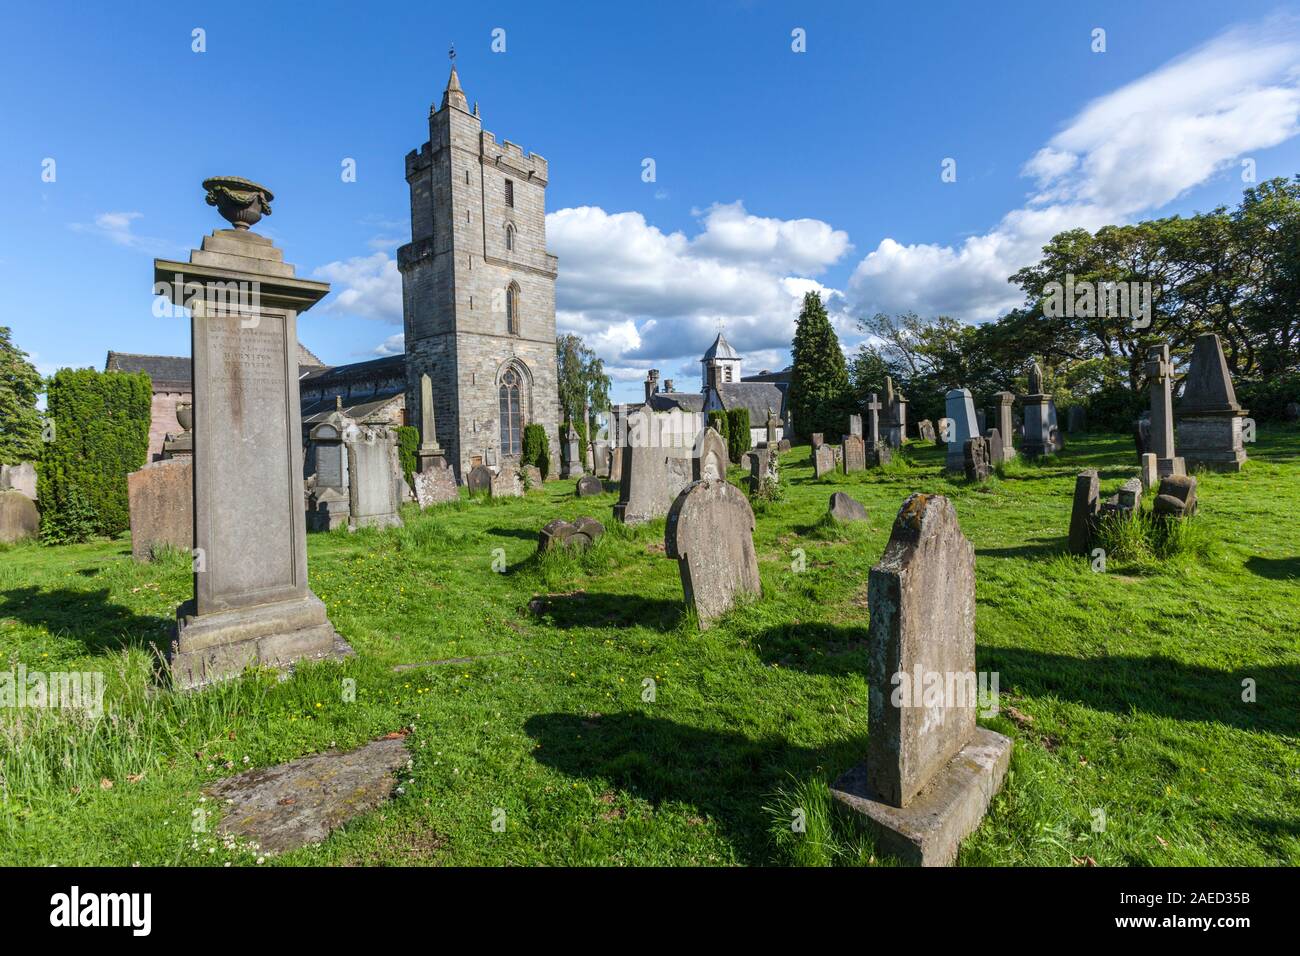 Valley Cemetery of the Church of the Holy Rude, medieval parish church, Stirling, Stirling and Falkirk, Scotland, UK Stock Photo